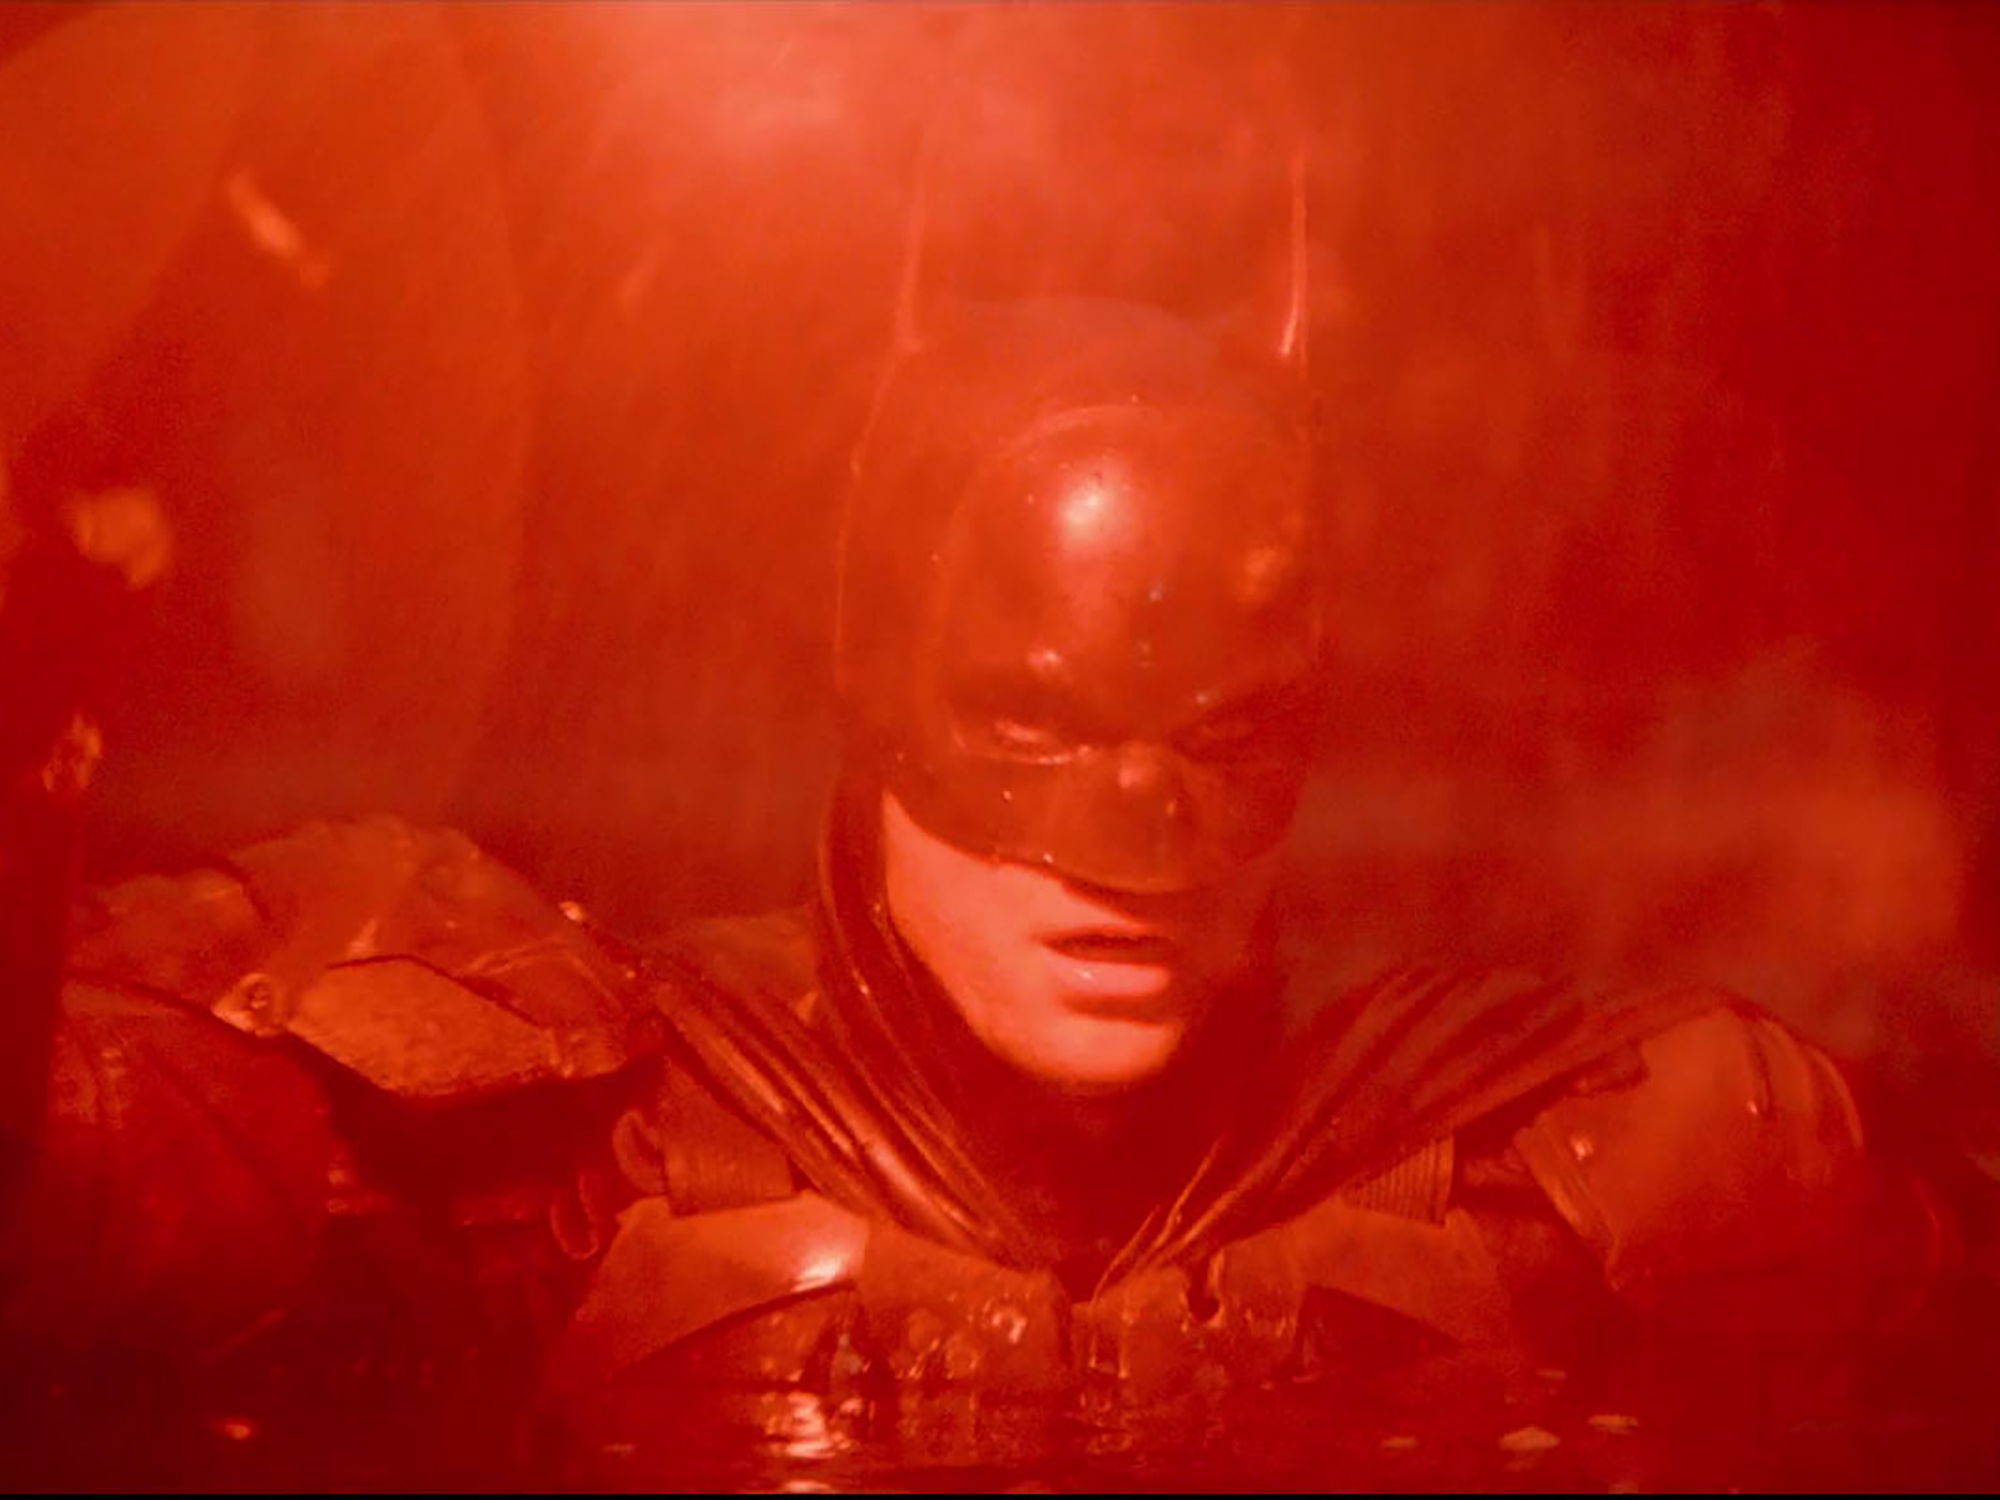 Why The Batman should win the Oscar for Best Cinematography